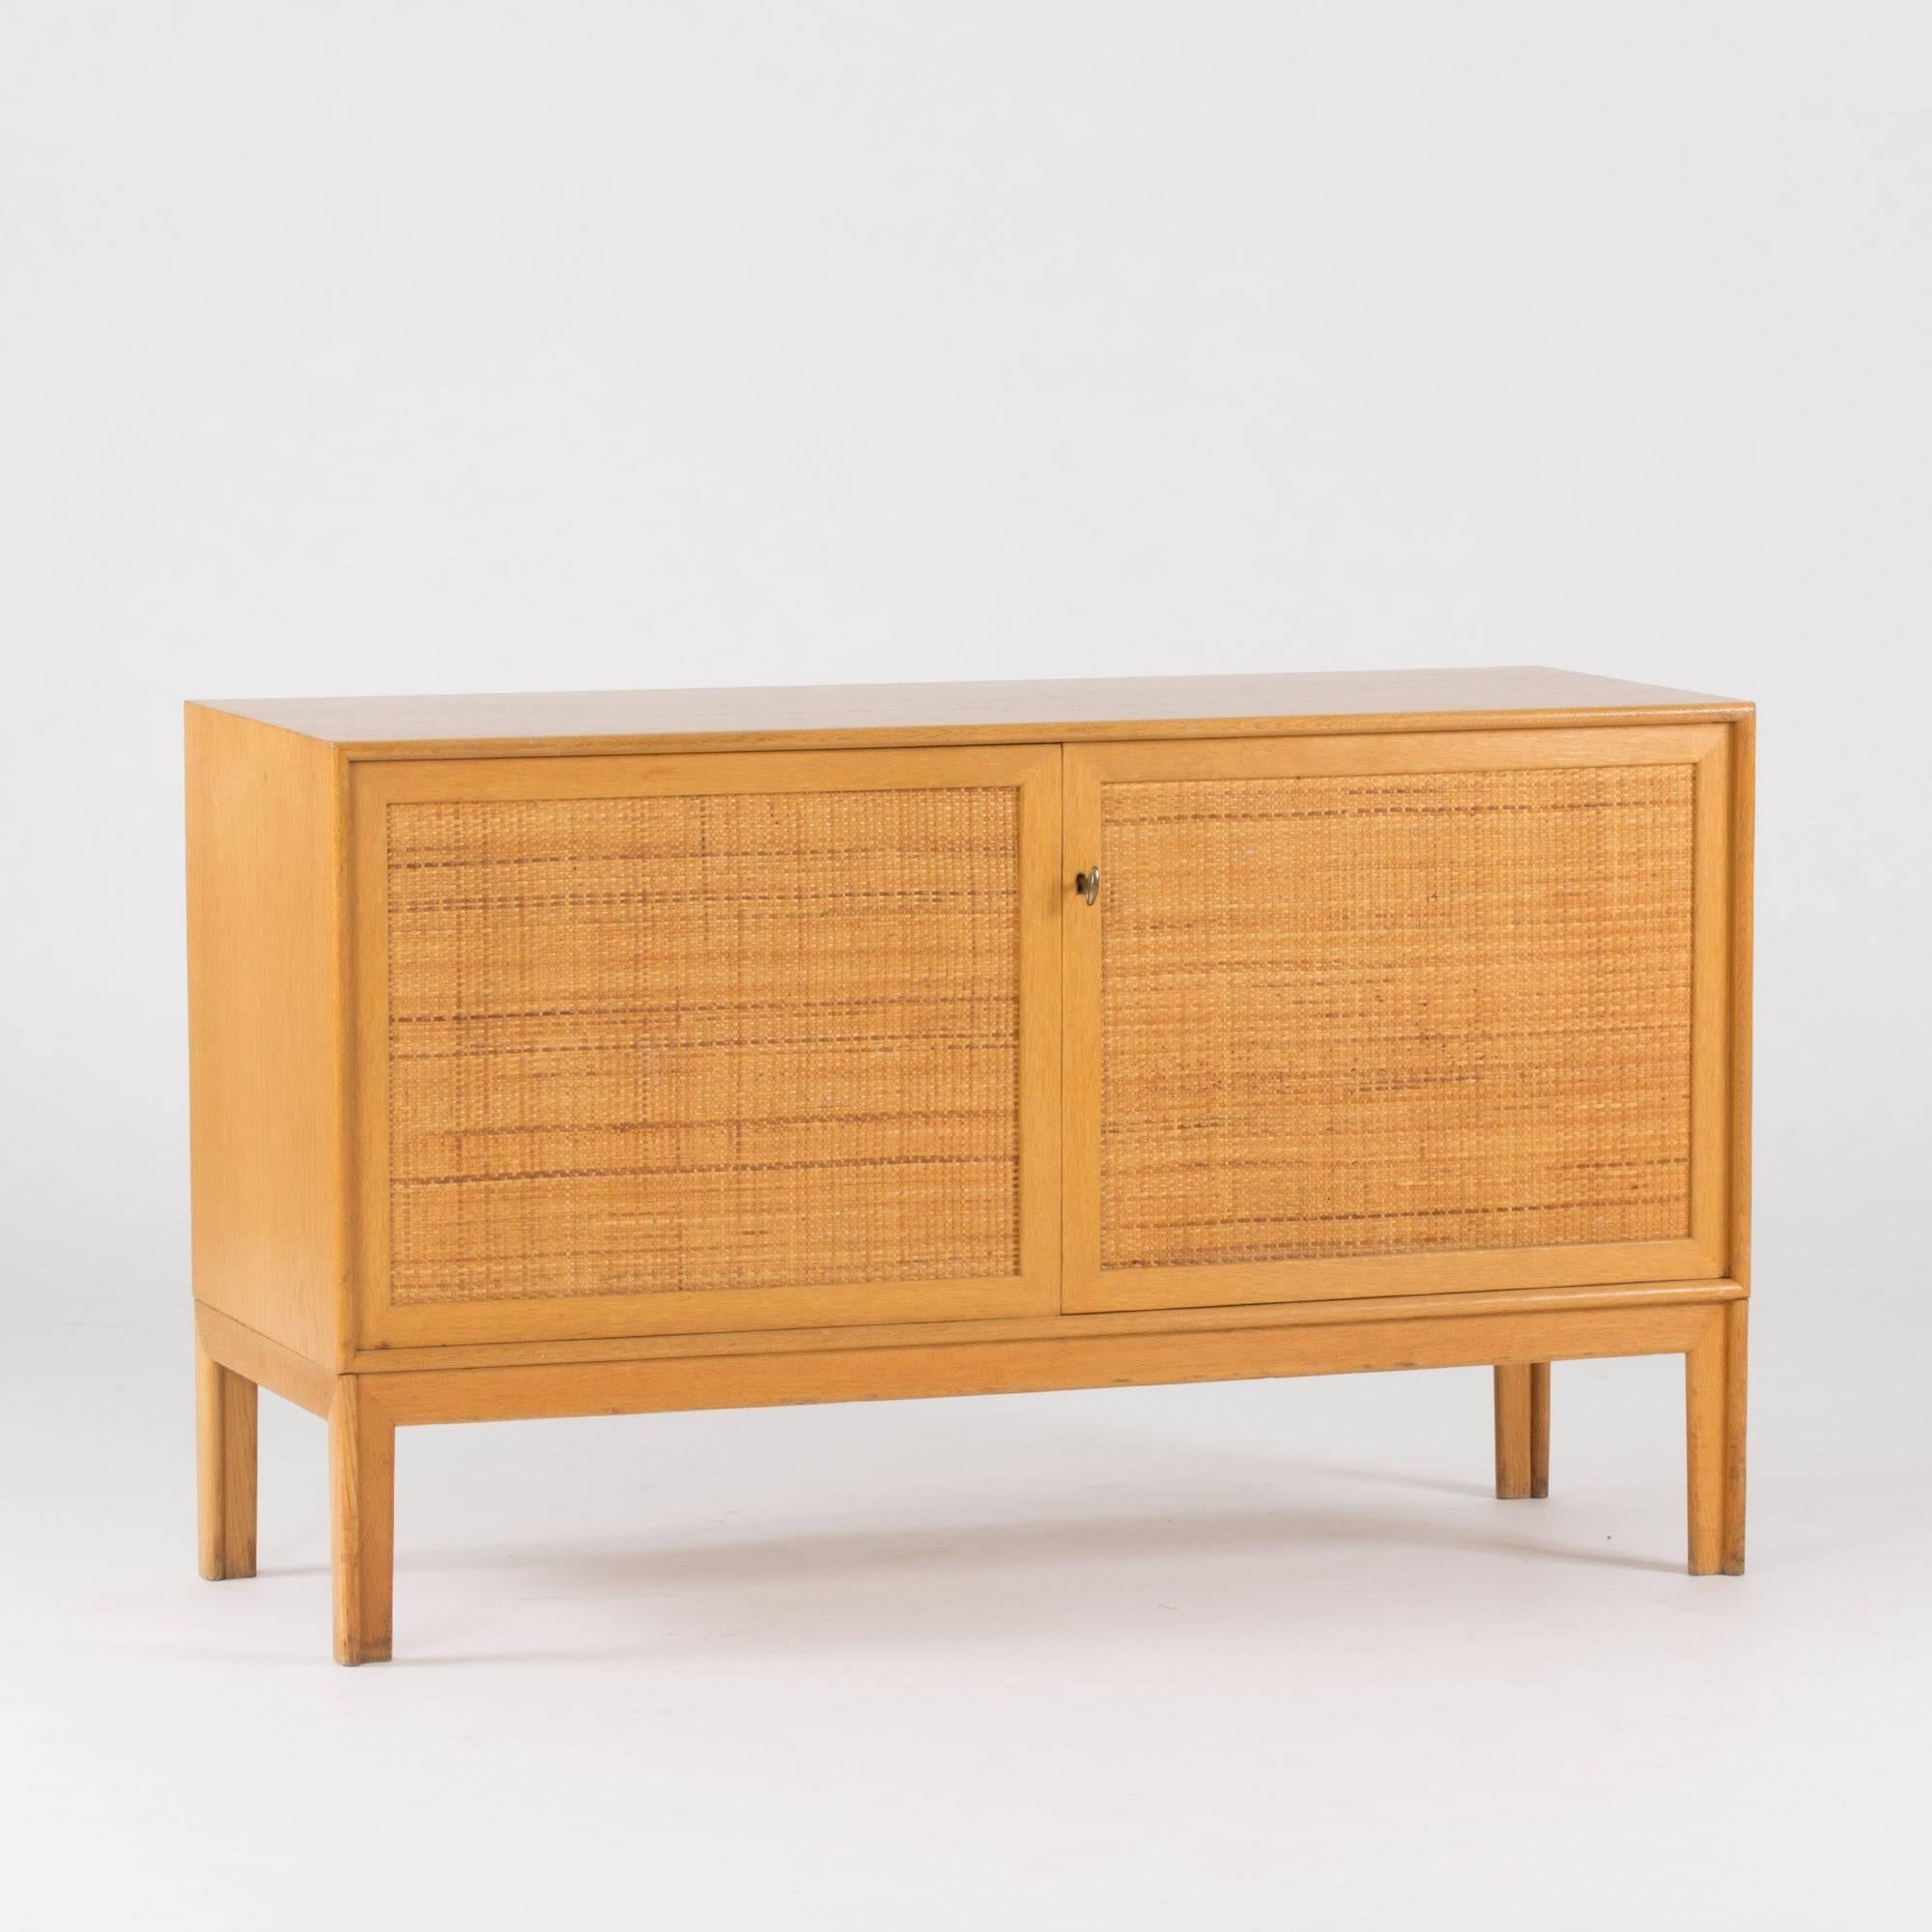 Oak sideboard with beautiful rattan fronts, designed by Alf Svensson for Bjästa. Two drawers inside on each side of a separating section. Nicely sculpted legs.